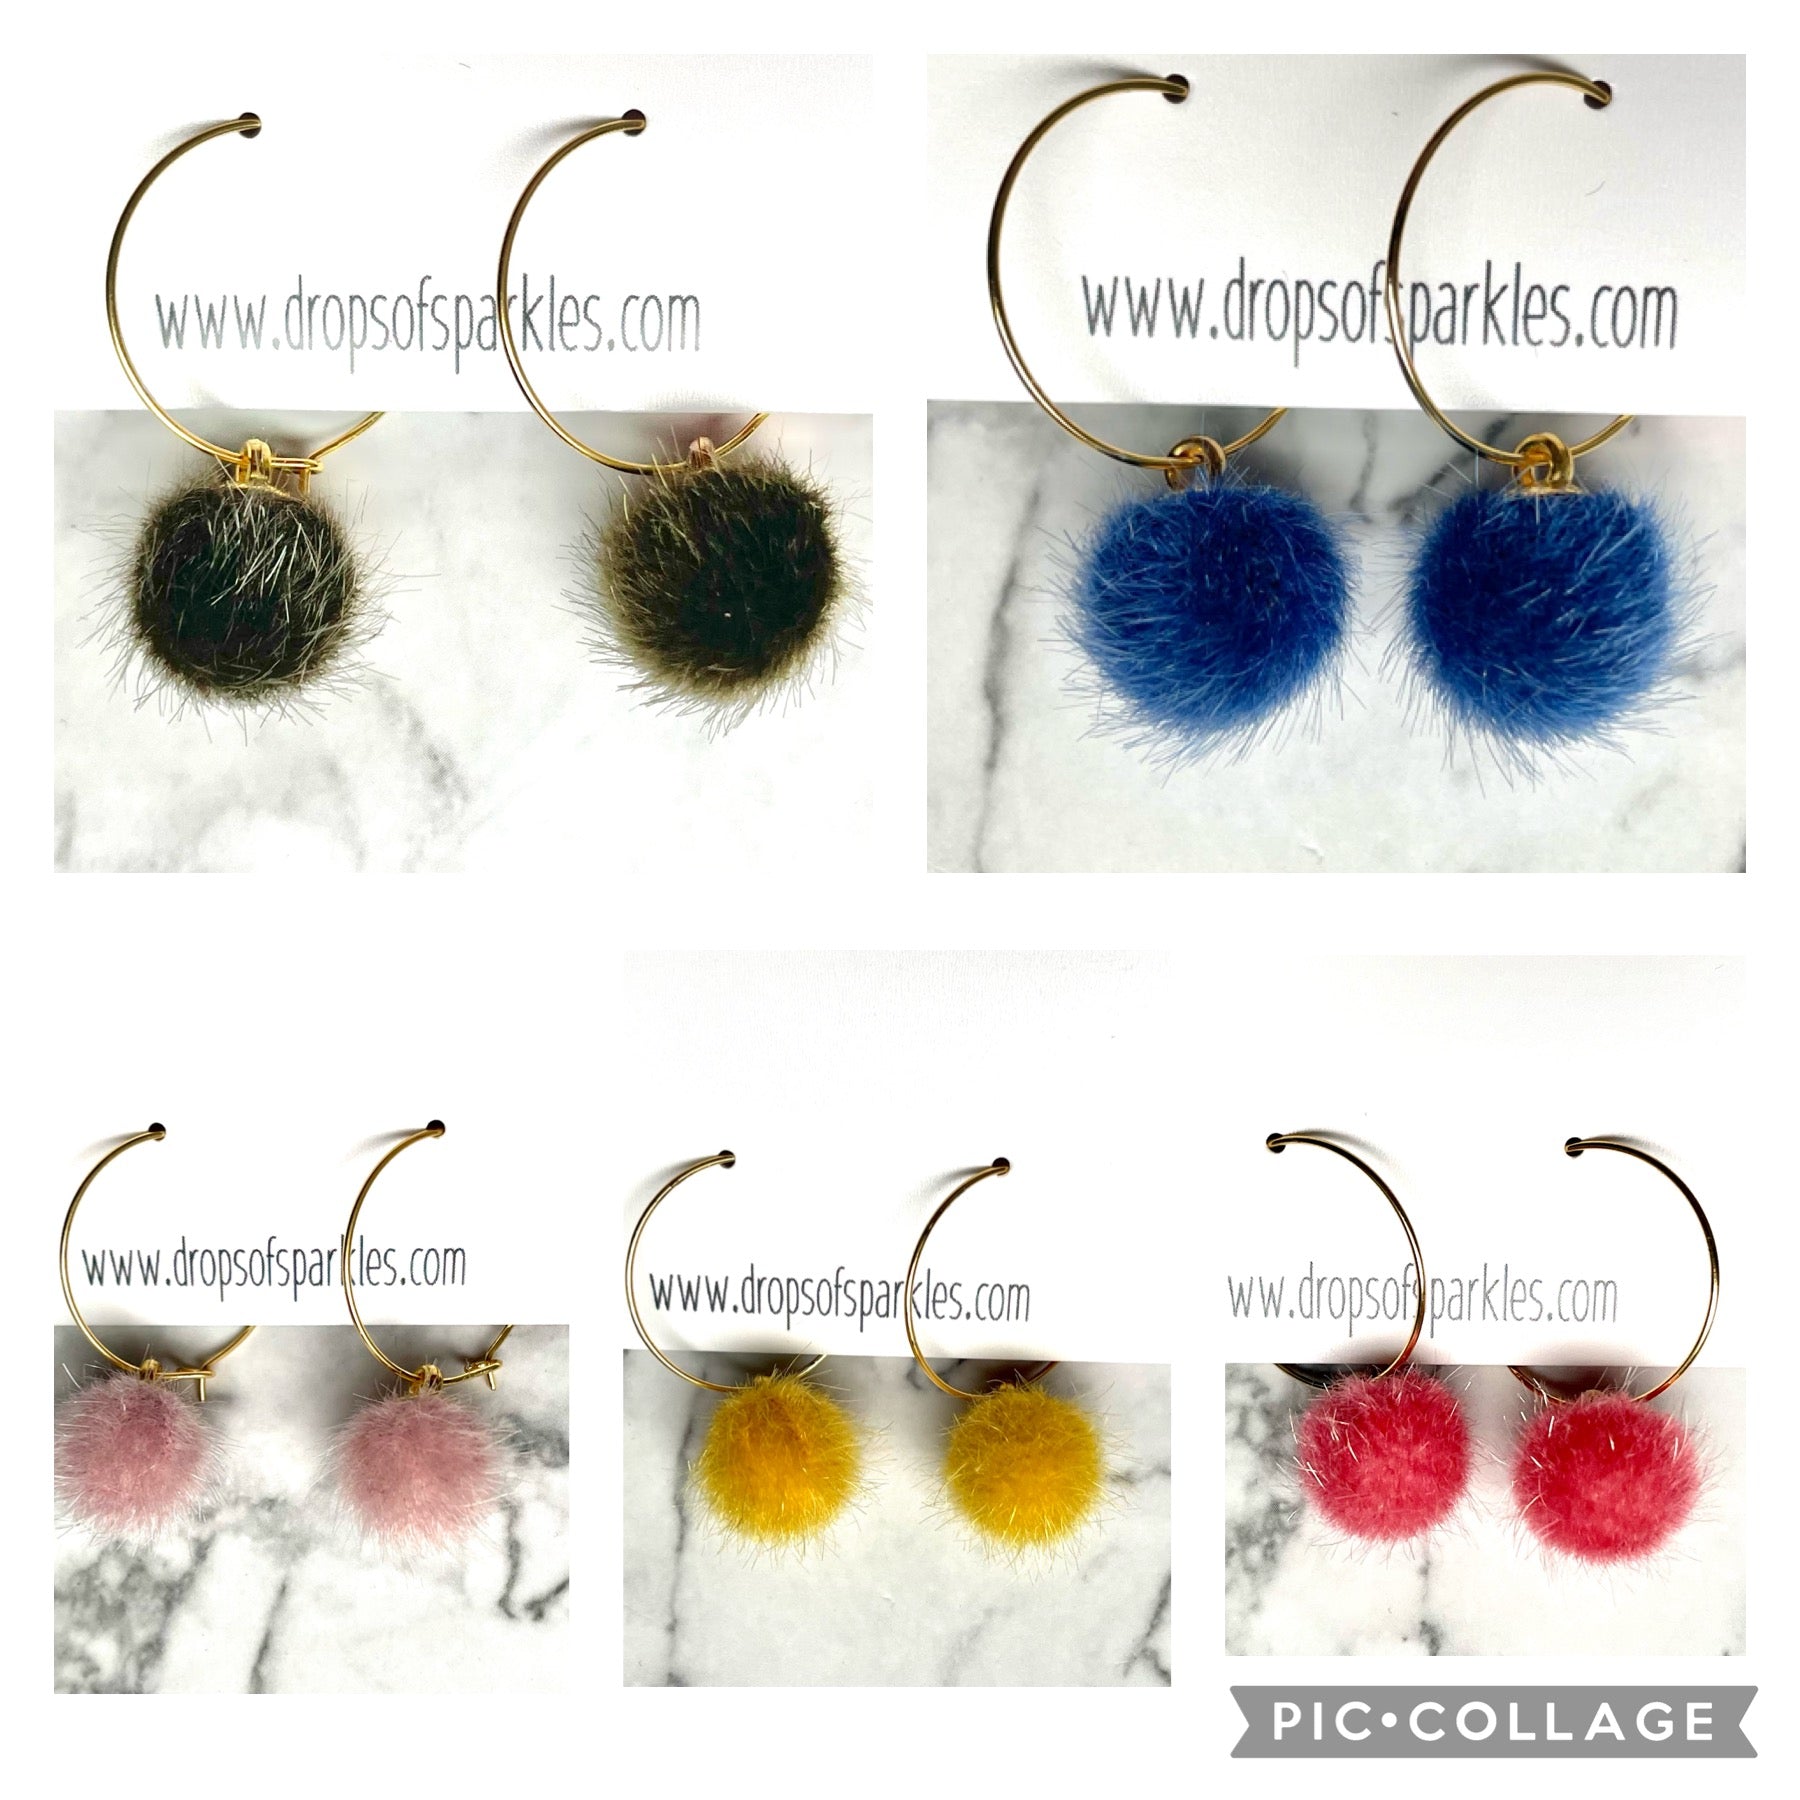 20mm round 24k shiny gold plated  "hoops" with fun little colorful fuzzy pom poms attached